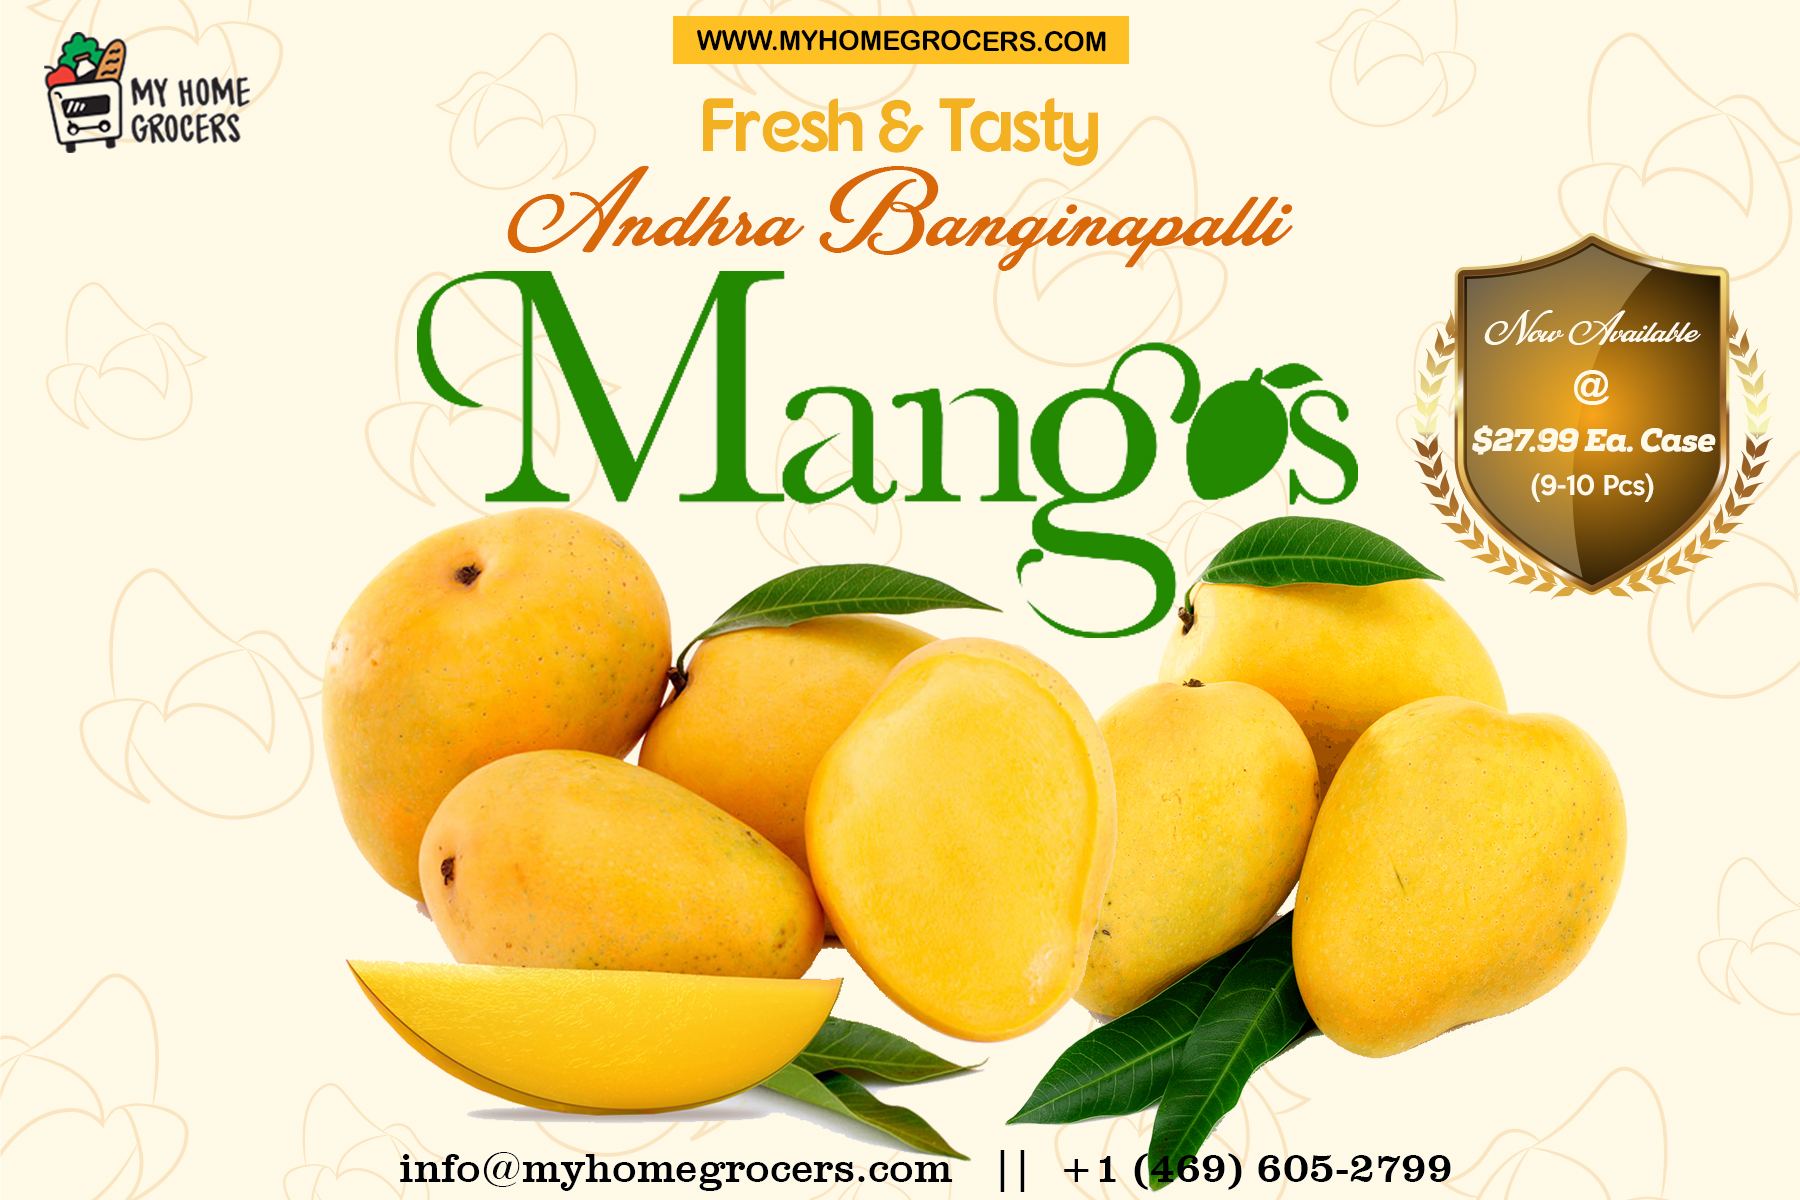 Now Available Mangoes from India!! Pre-Orders Acce